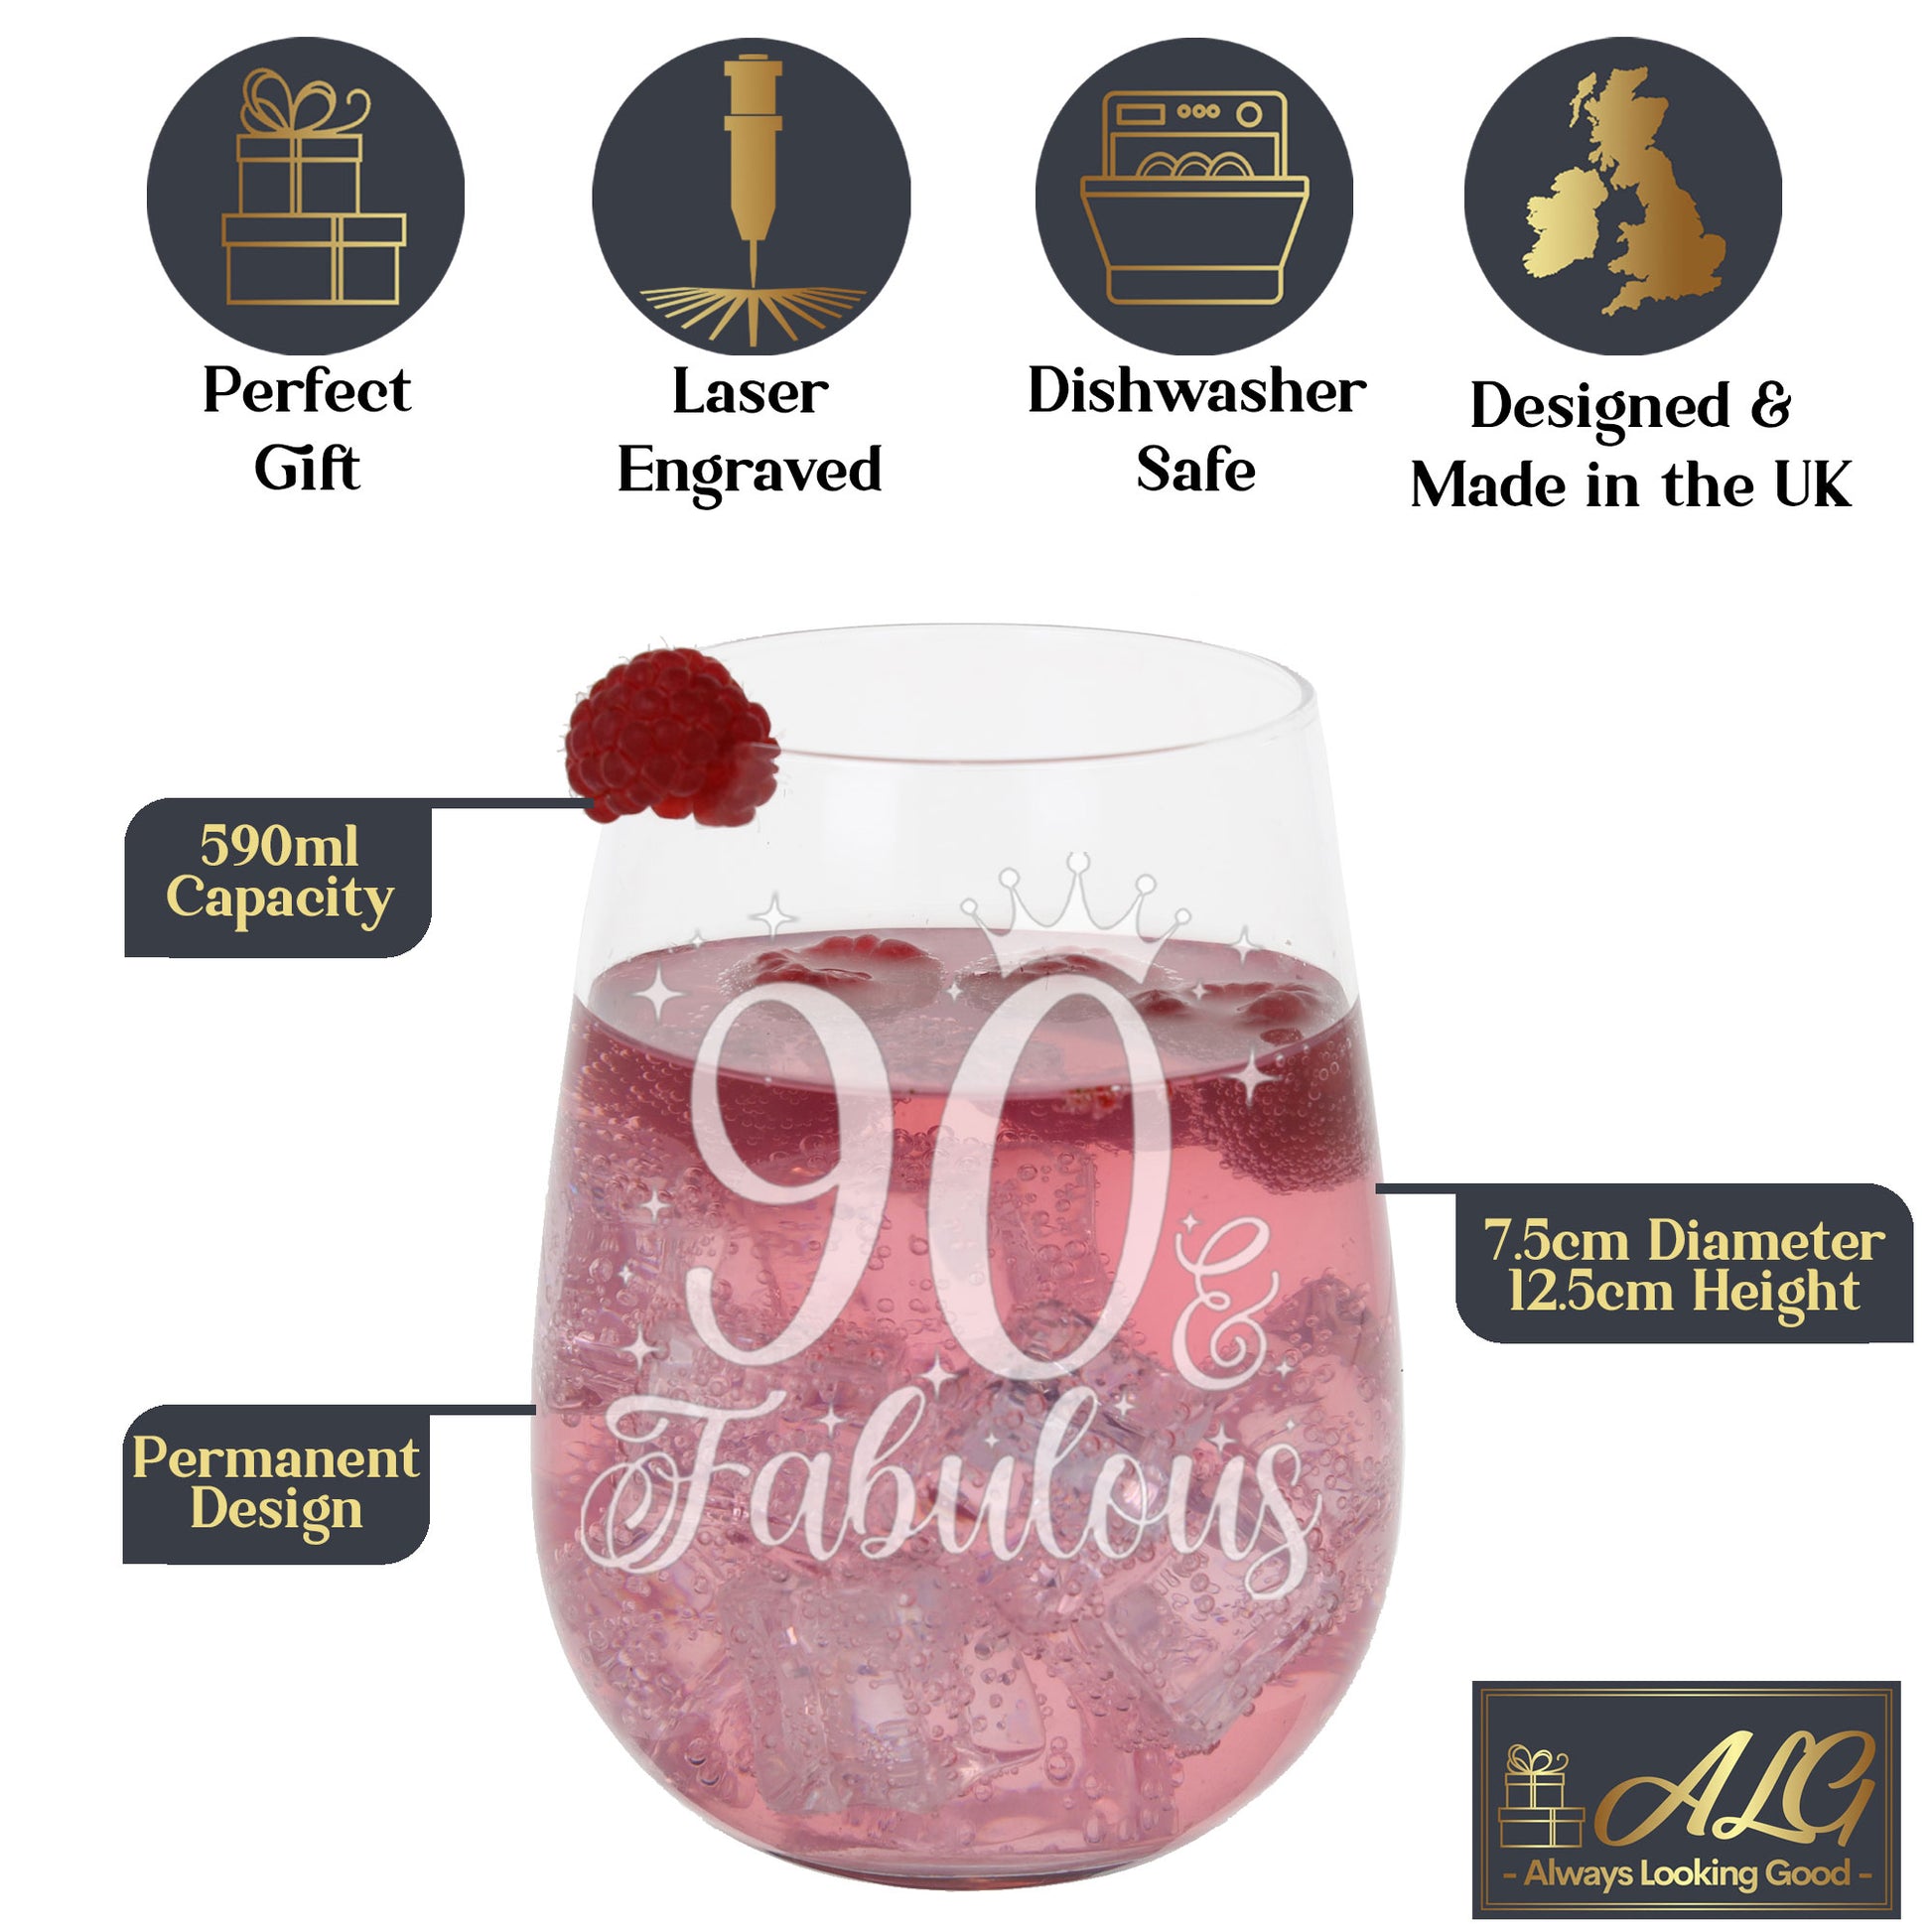 90 & Fabulous Engraved Stemless Gin Glass and/or Coaster Set  - Always Looking Good -   